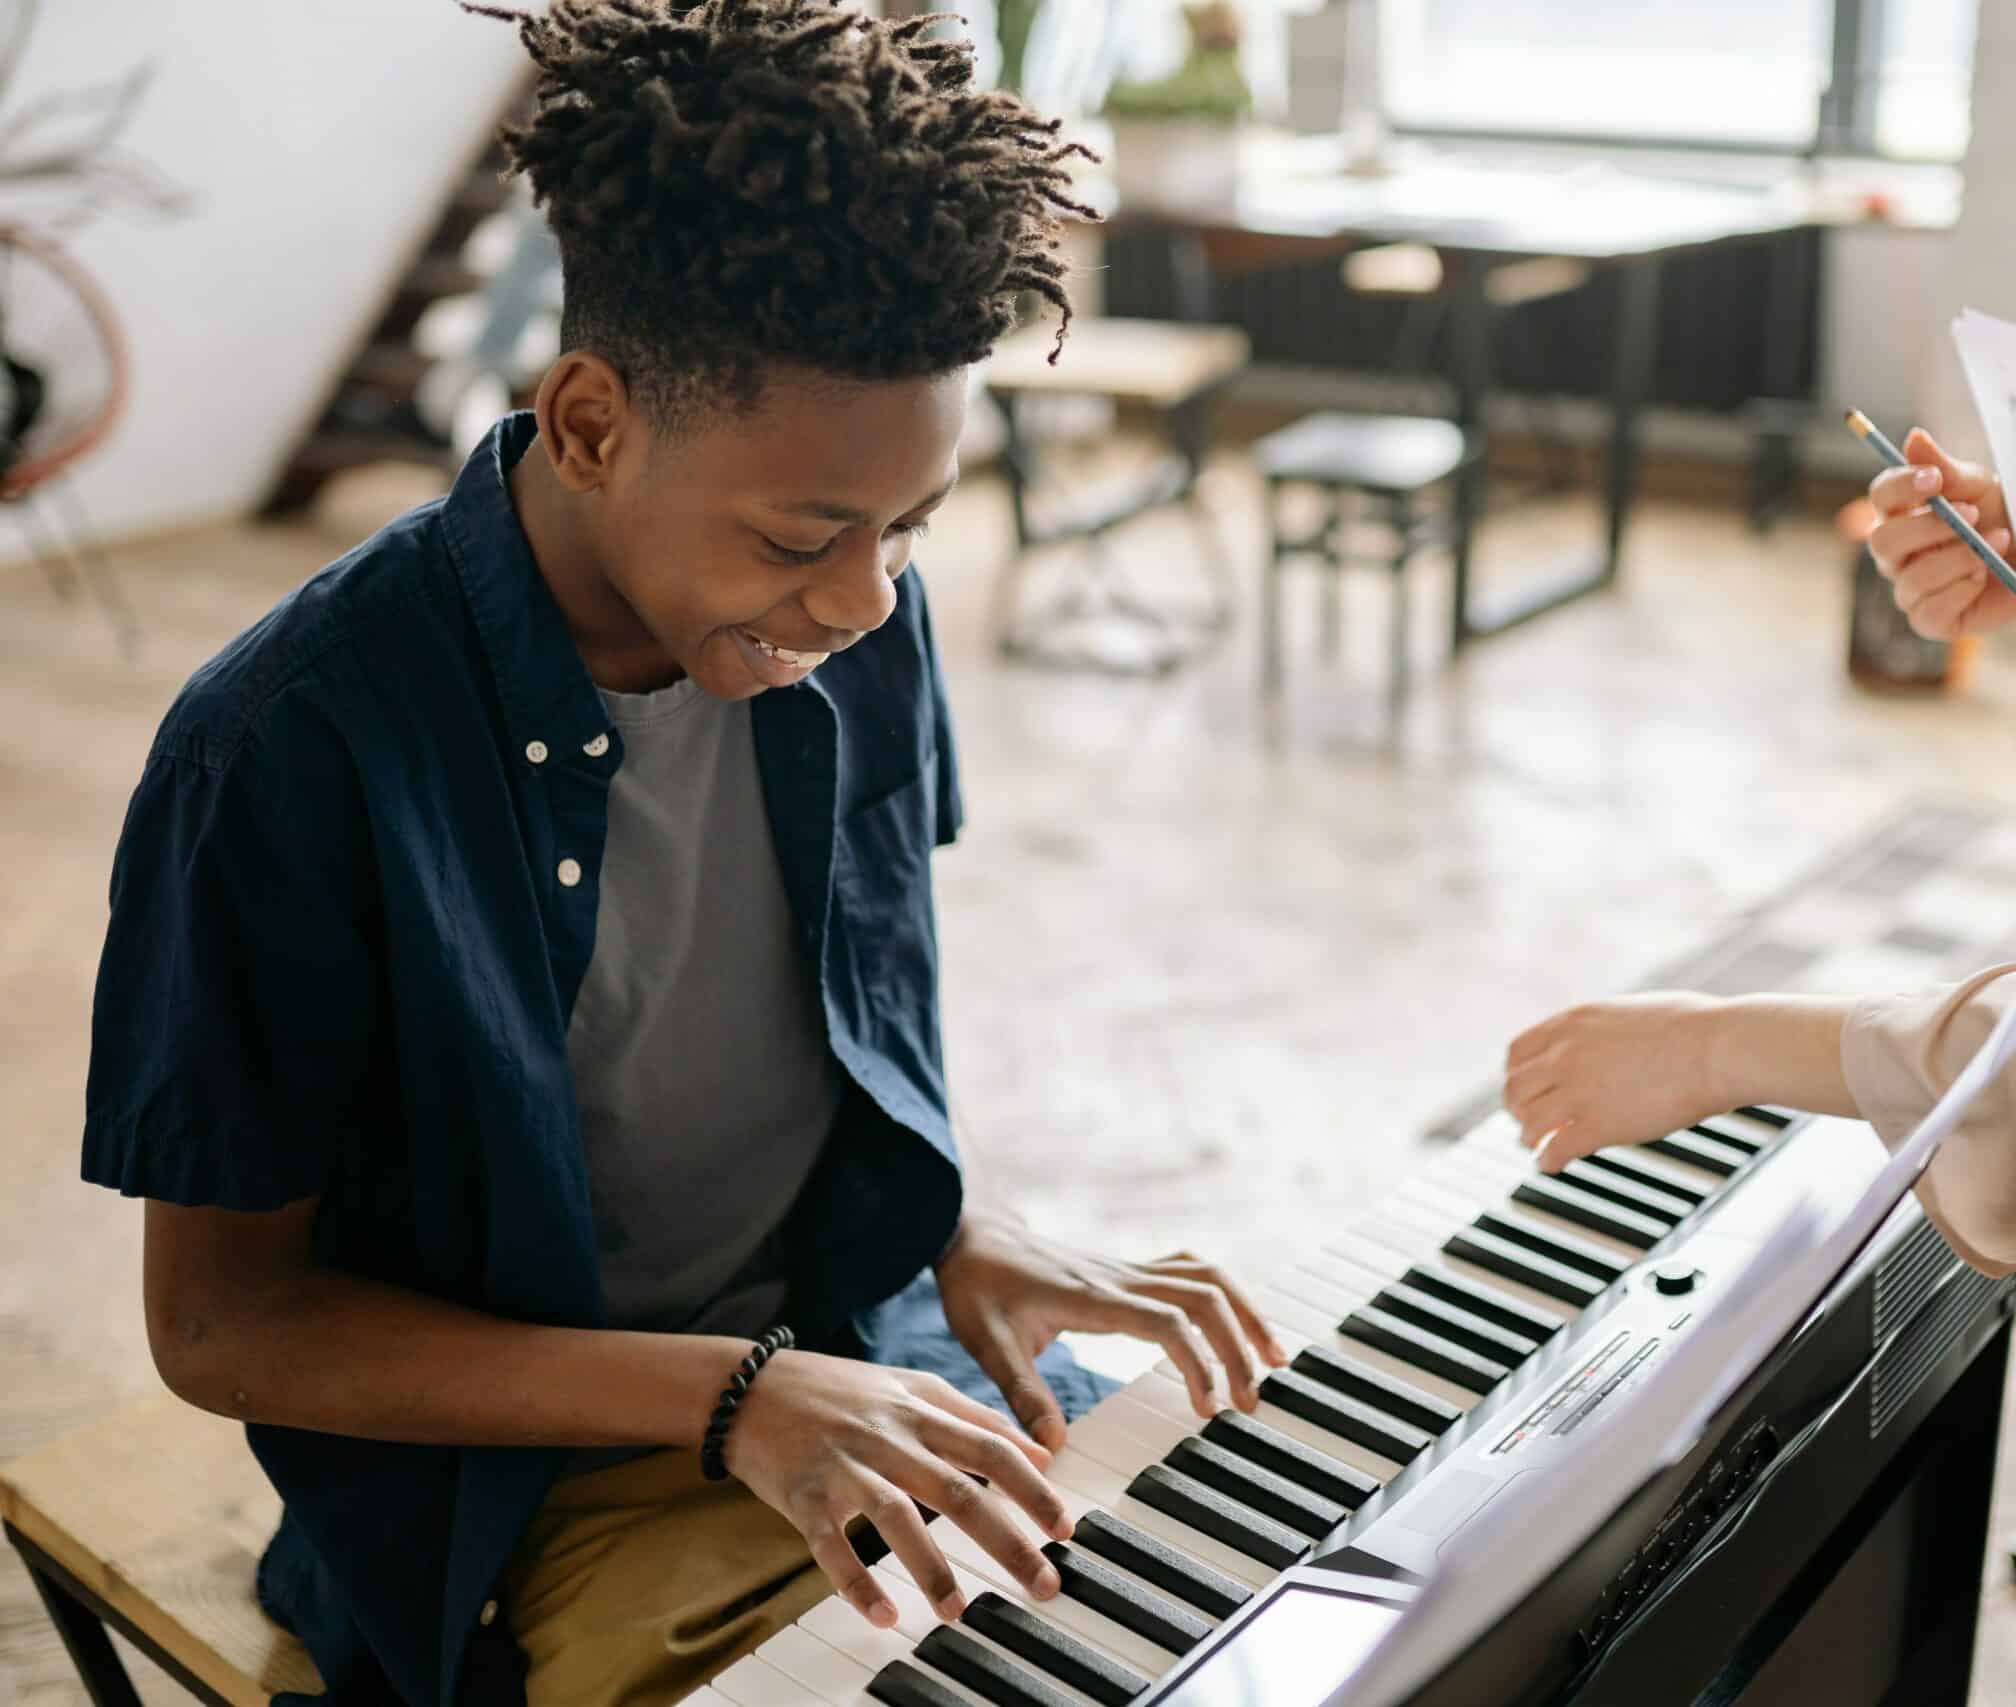 a young boy teenager playing piano and having fun